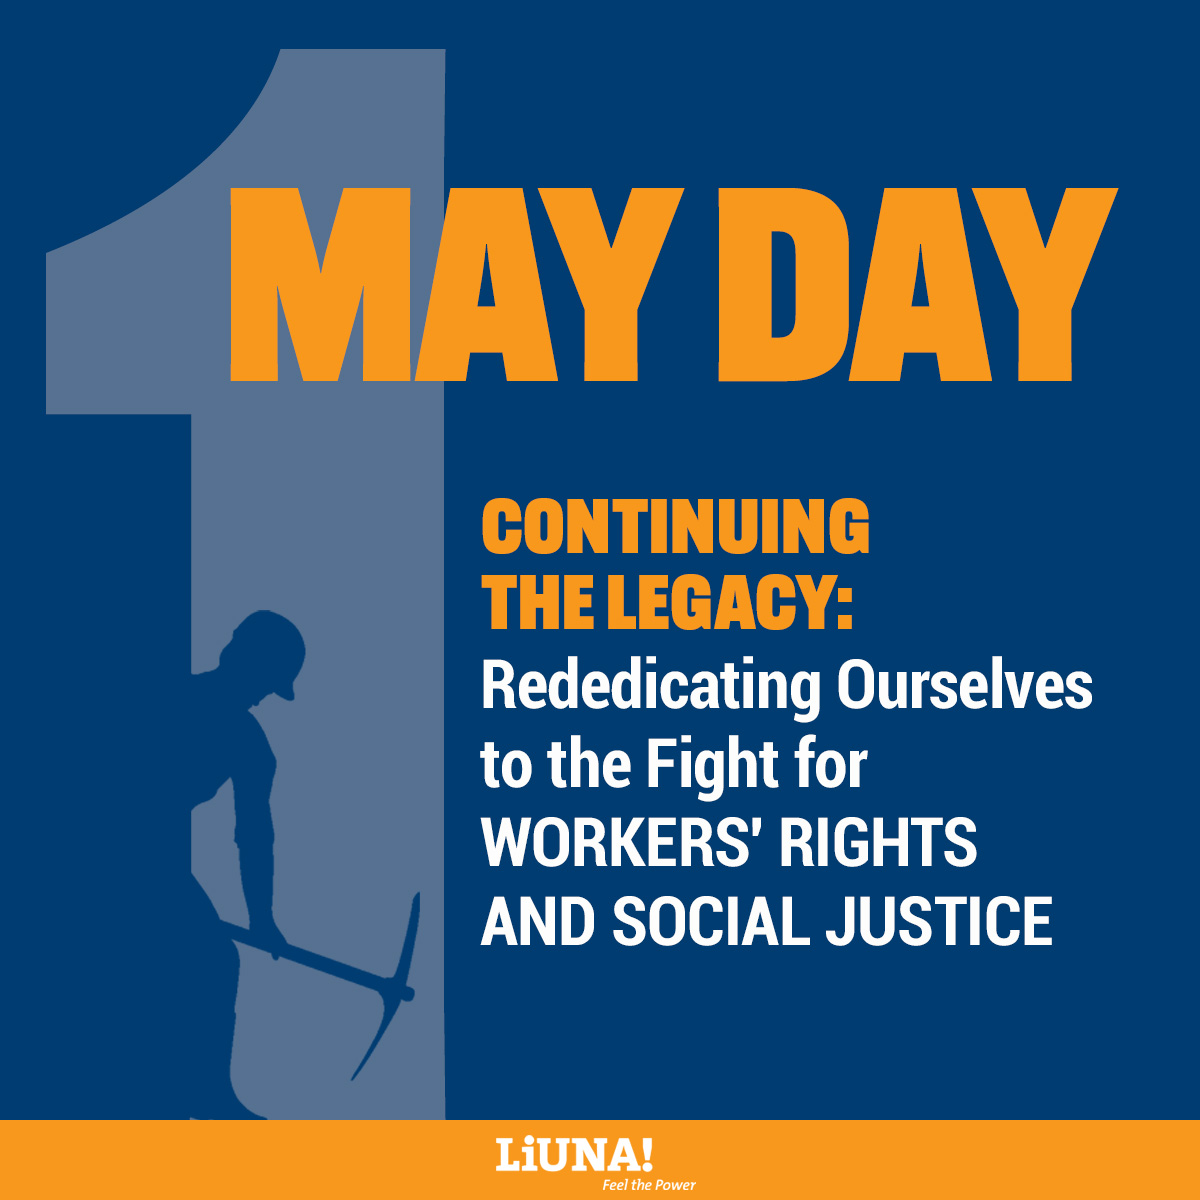 Today we celebrate the strength and resilience of workers everywhere. Solidarity forever! ✊ #MayDay #LIUNA #LIUNABuilds #Solidarity #FeelThePower